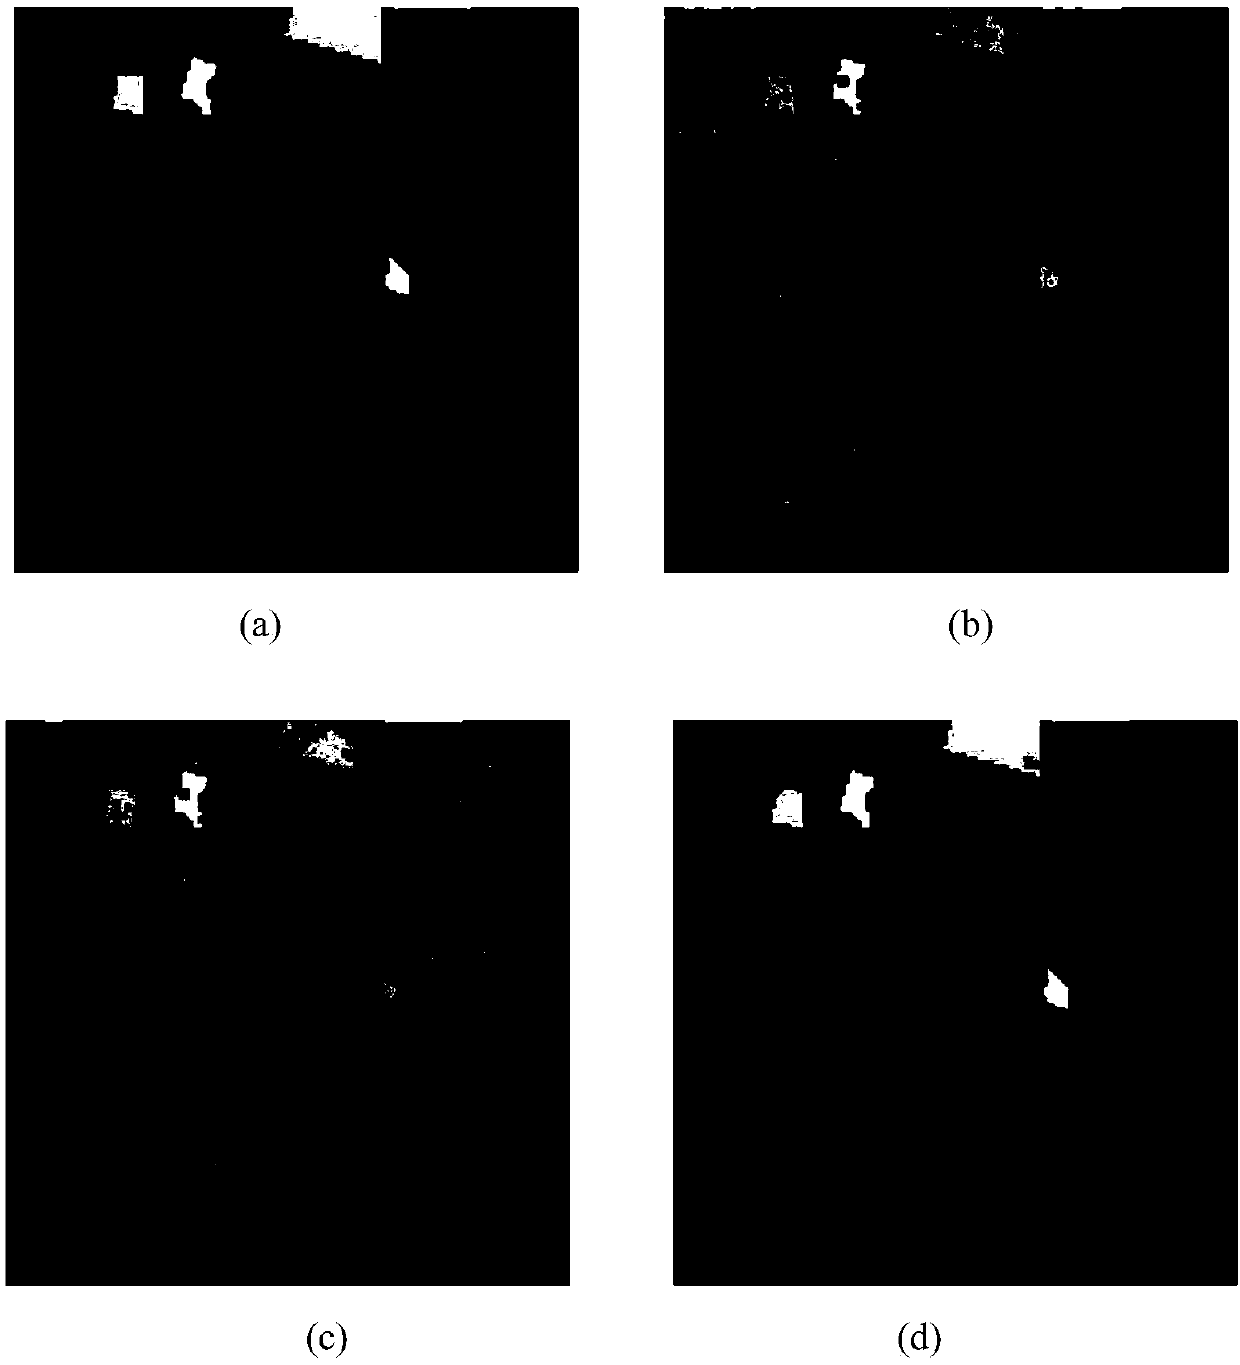 Tensorized embedded hyperspectral image classification method based on sparse low-rank regular graph